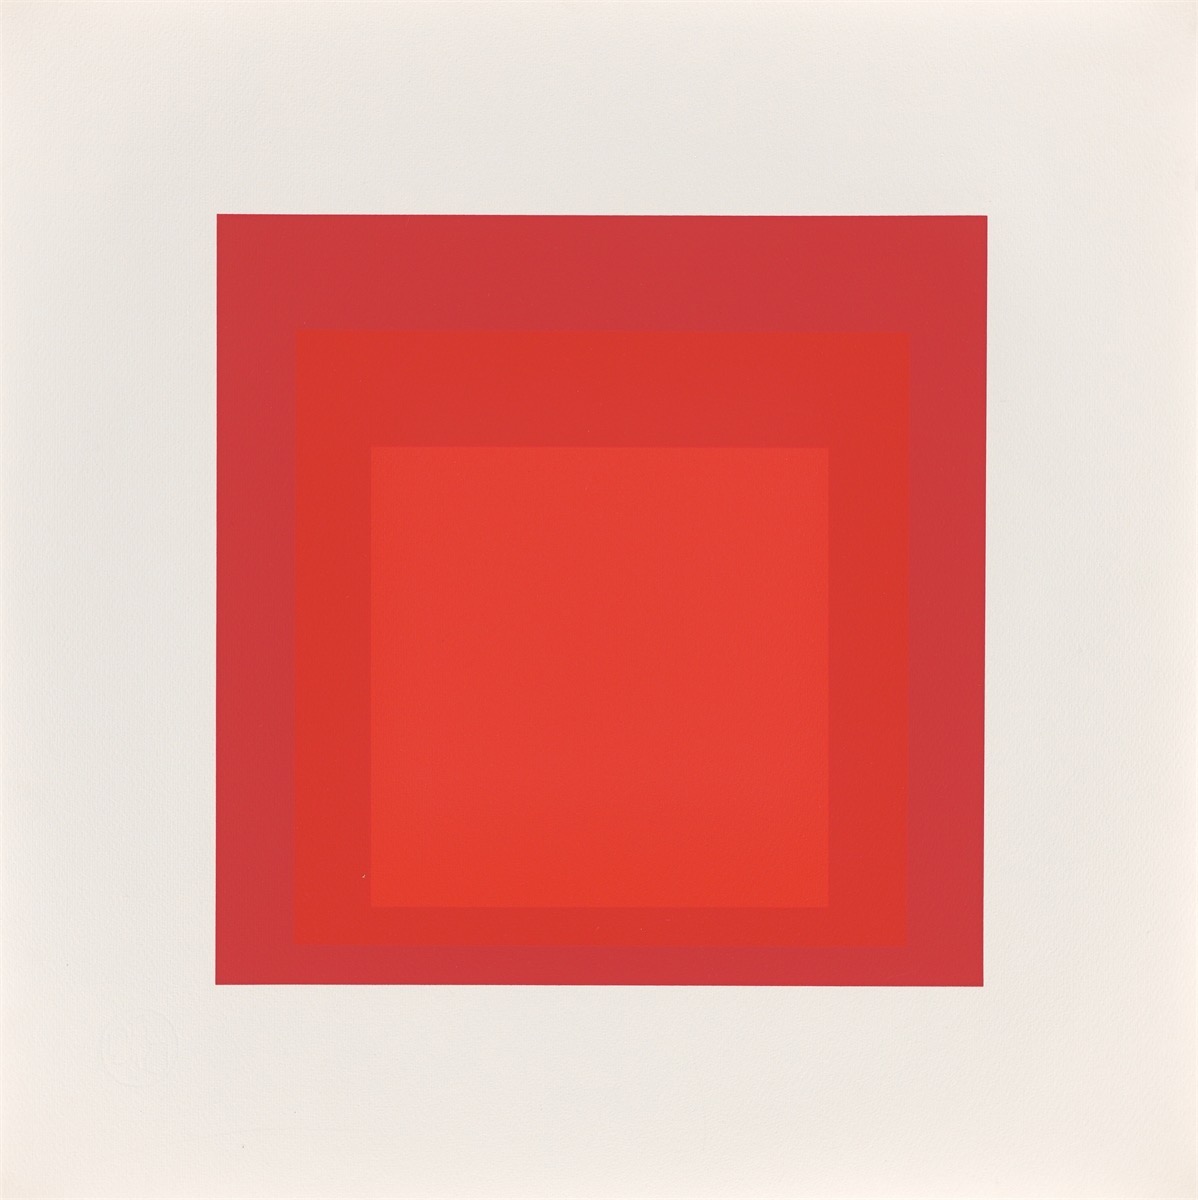 Josef Albers. ”Homage to the Square: Edition Keller I”. 1970 - Image 4 of 8